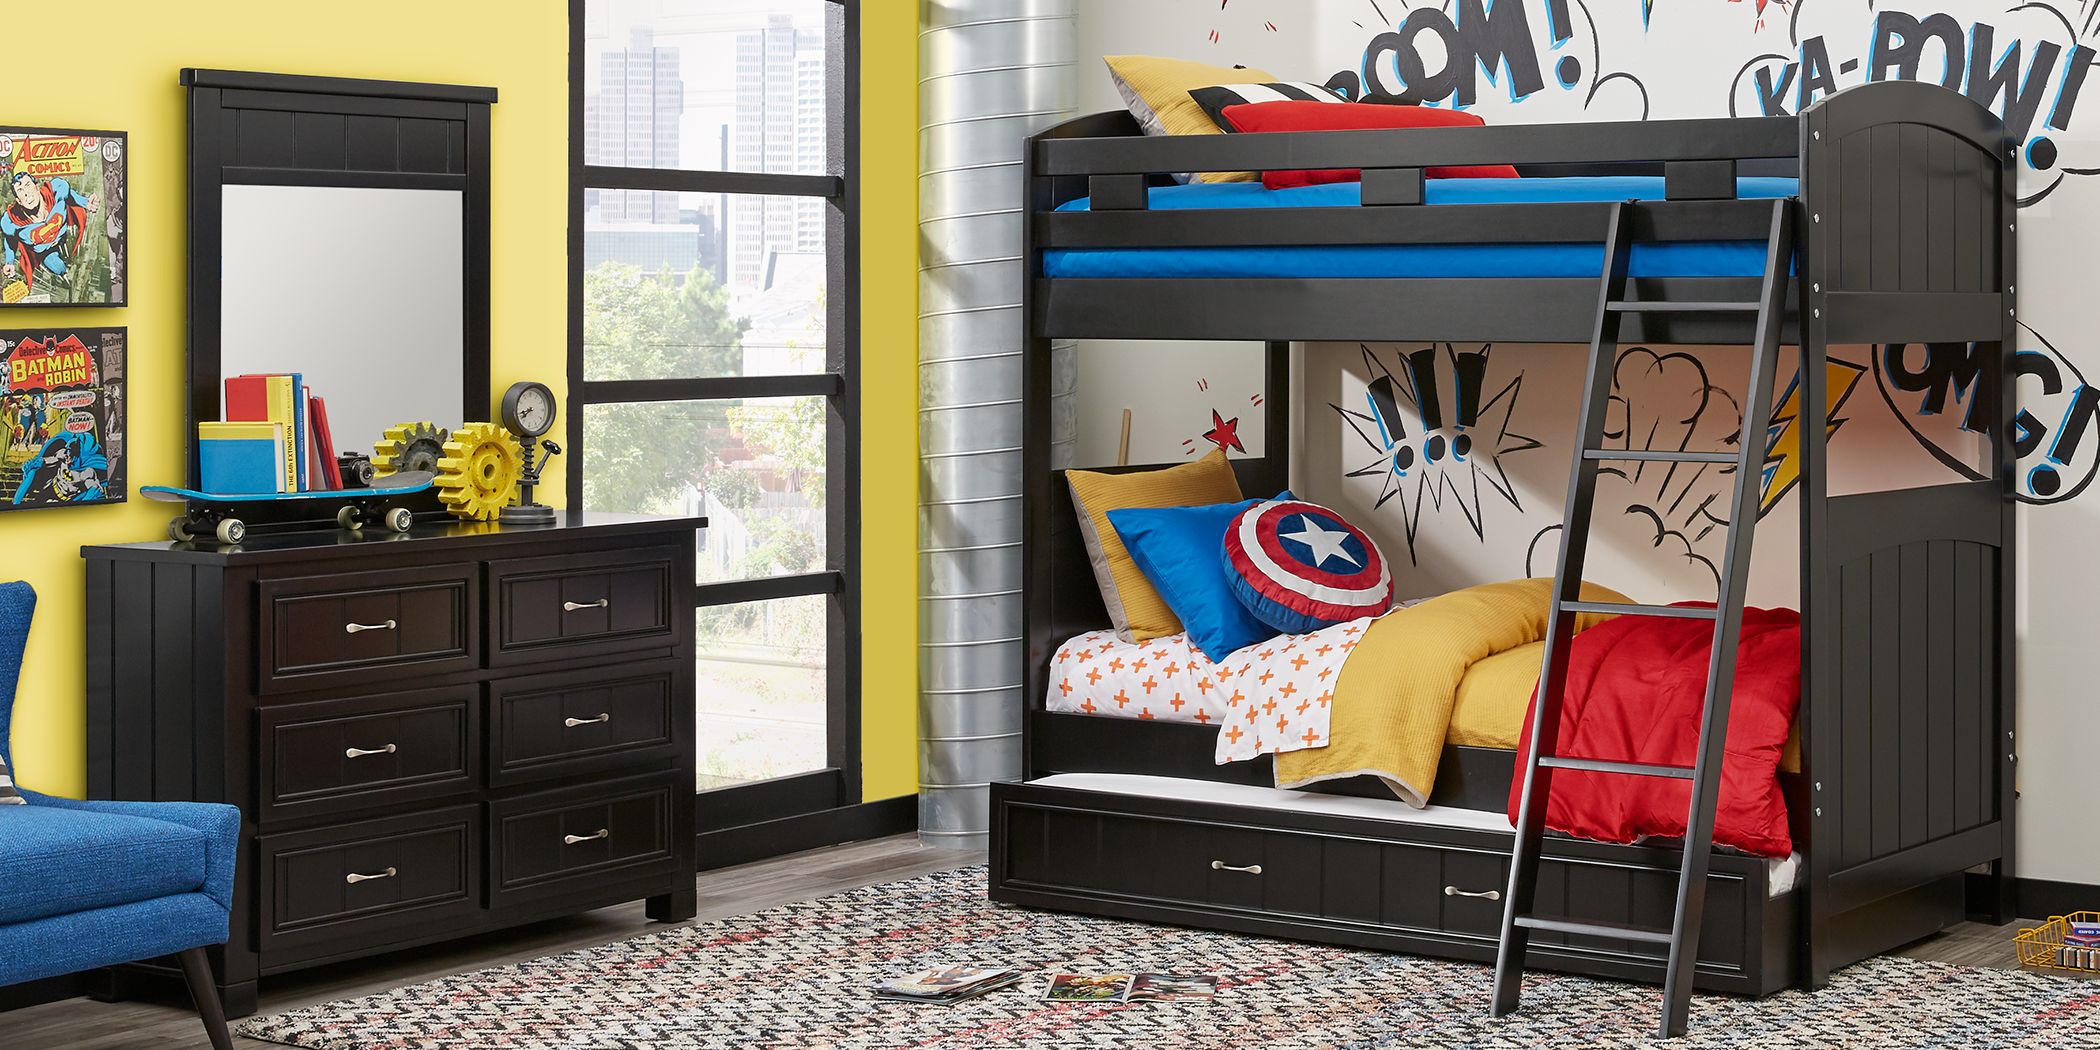 Cottage Colors Black Twin Bunk Bed, Rooms To Go Cottage Colors Bunk Bed